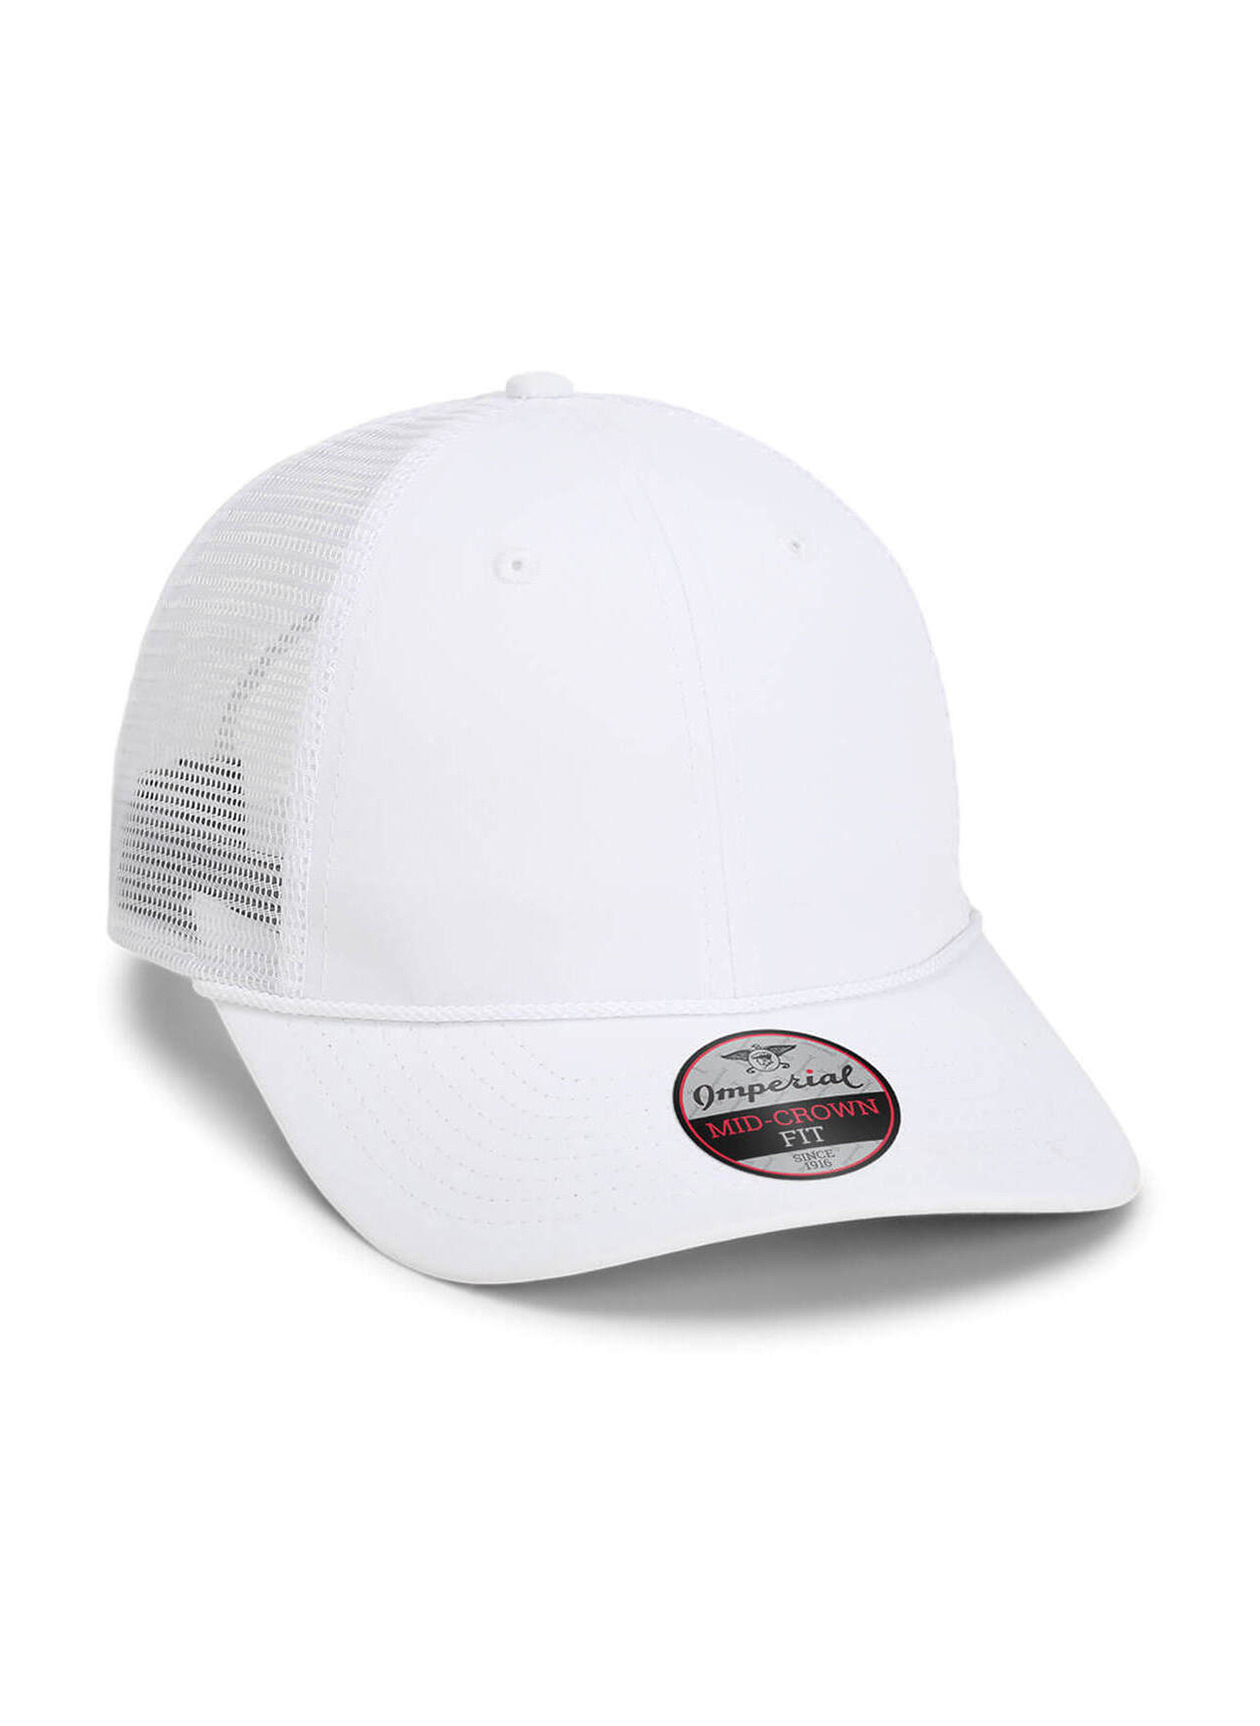 Imperial White The Night Owl Mesh Back Performance Hat